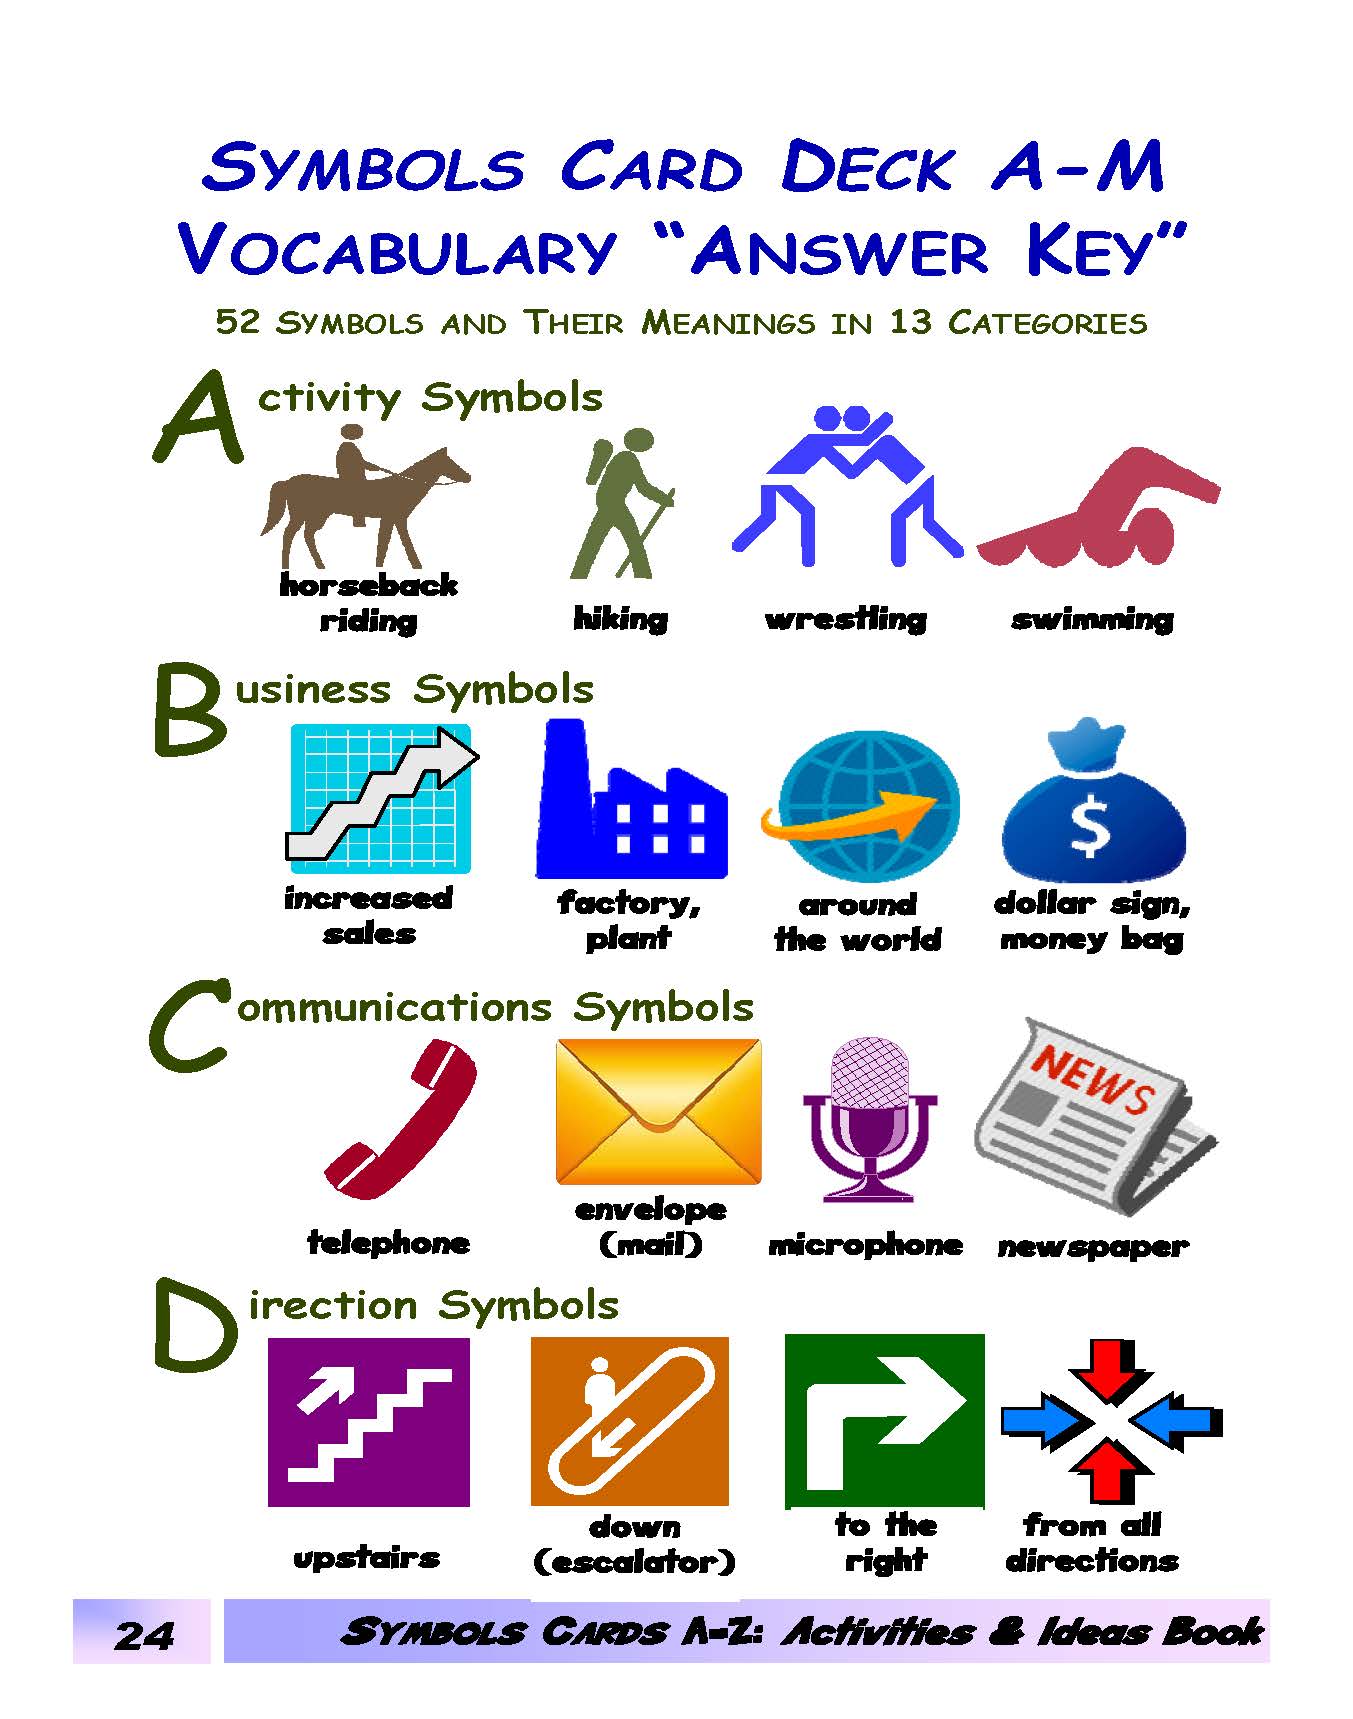 C-03.01 Get Why & How to Use Picture Cards for Vocabulary in Categories